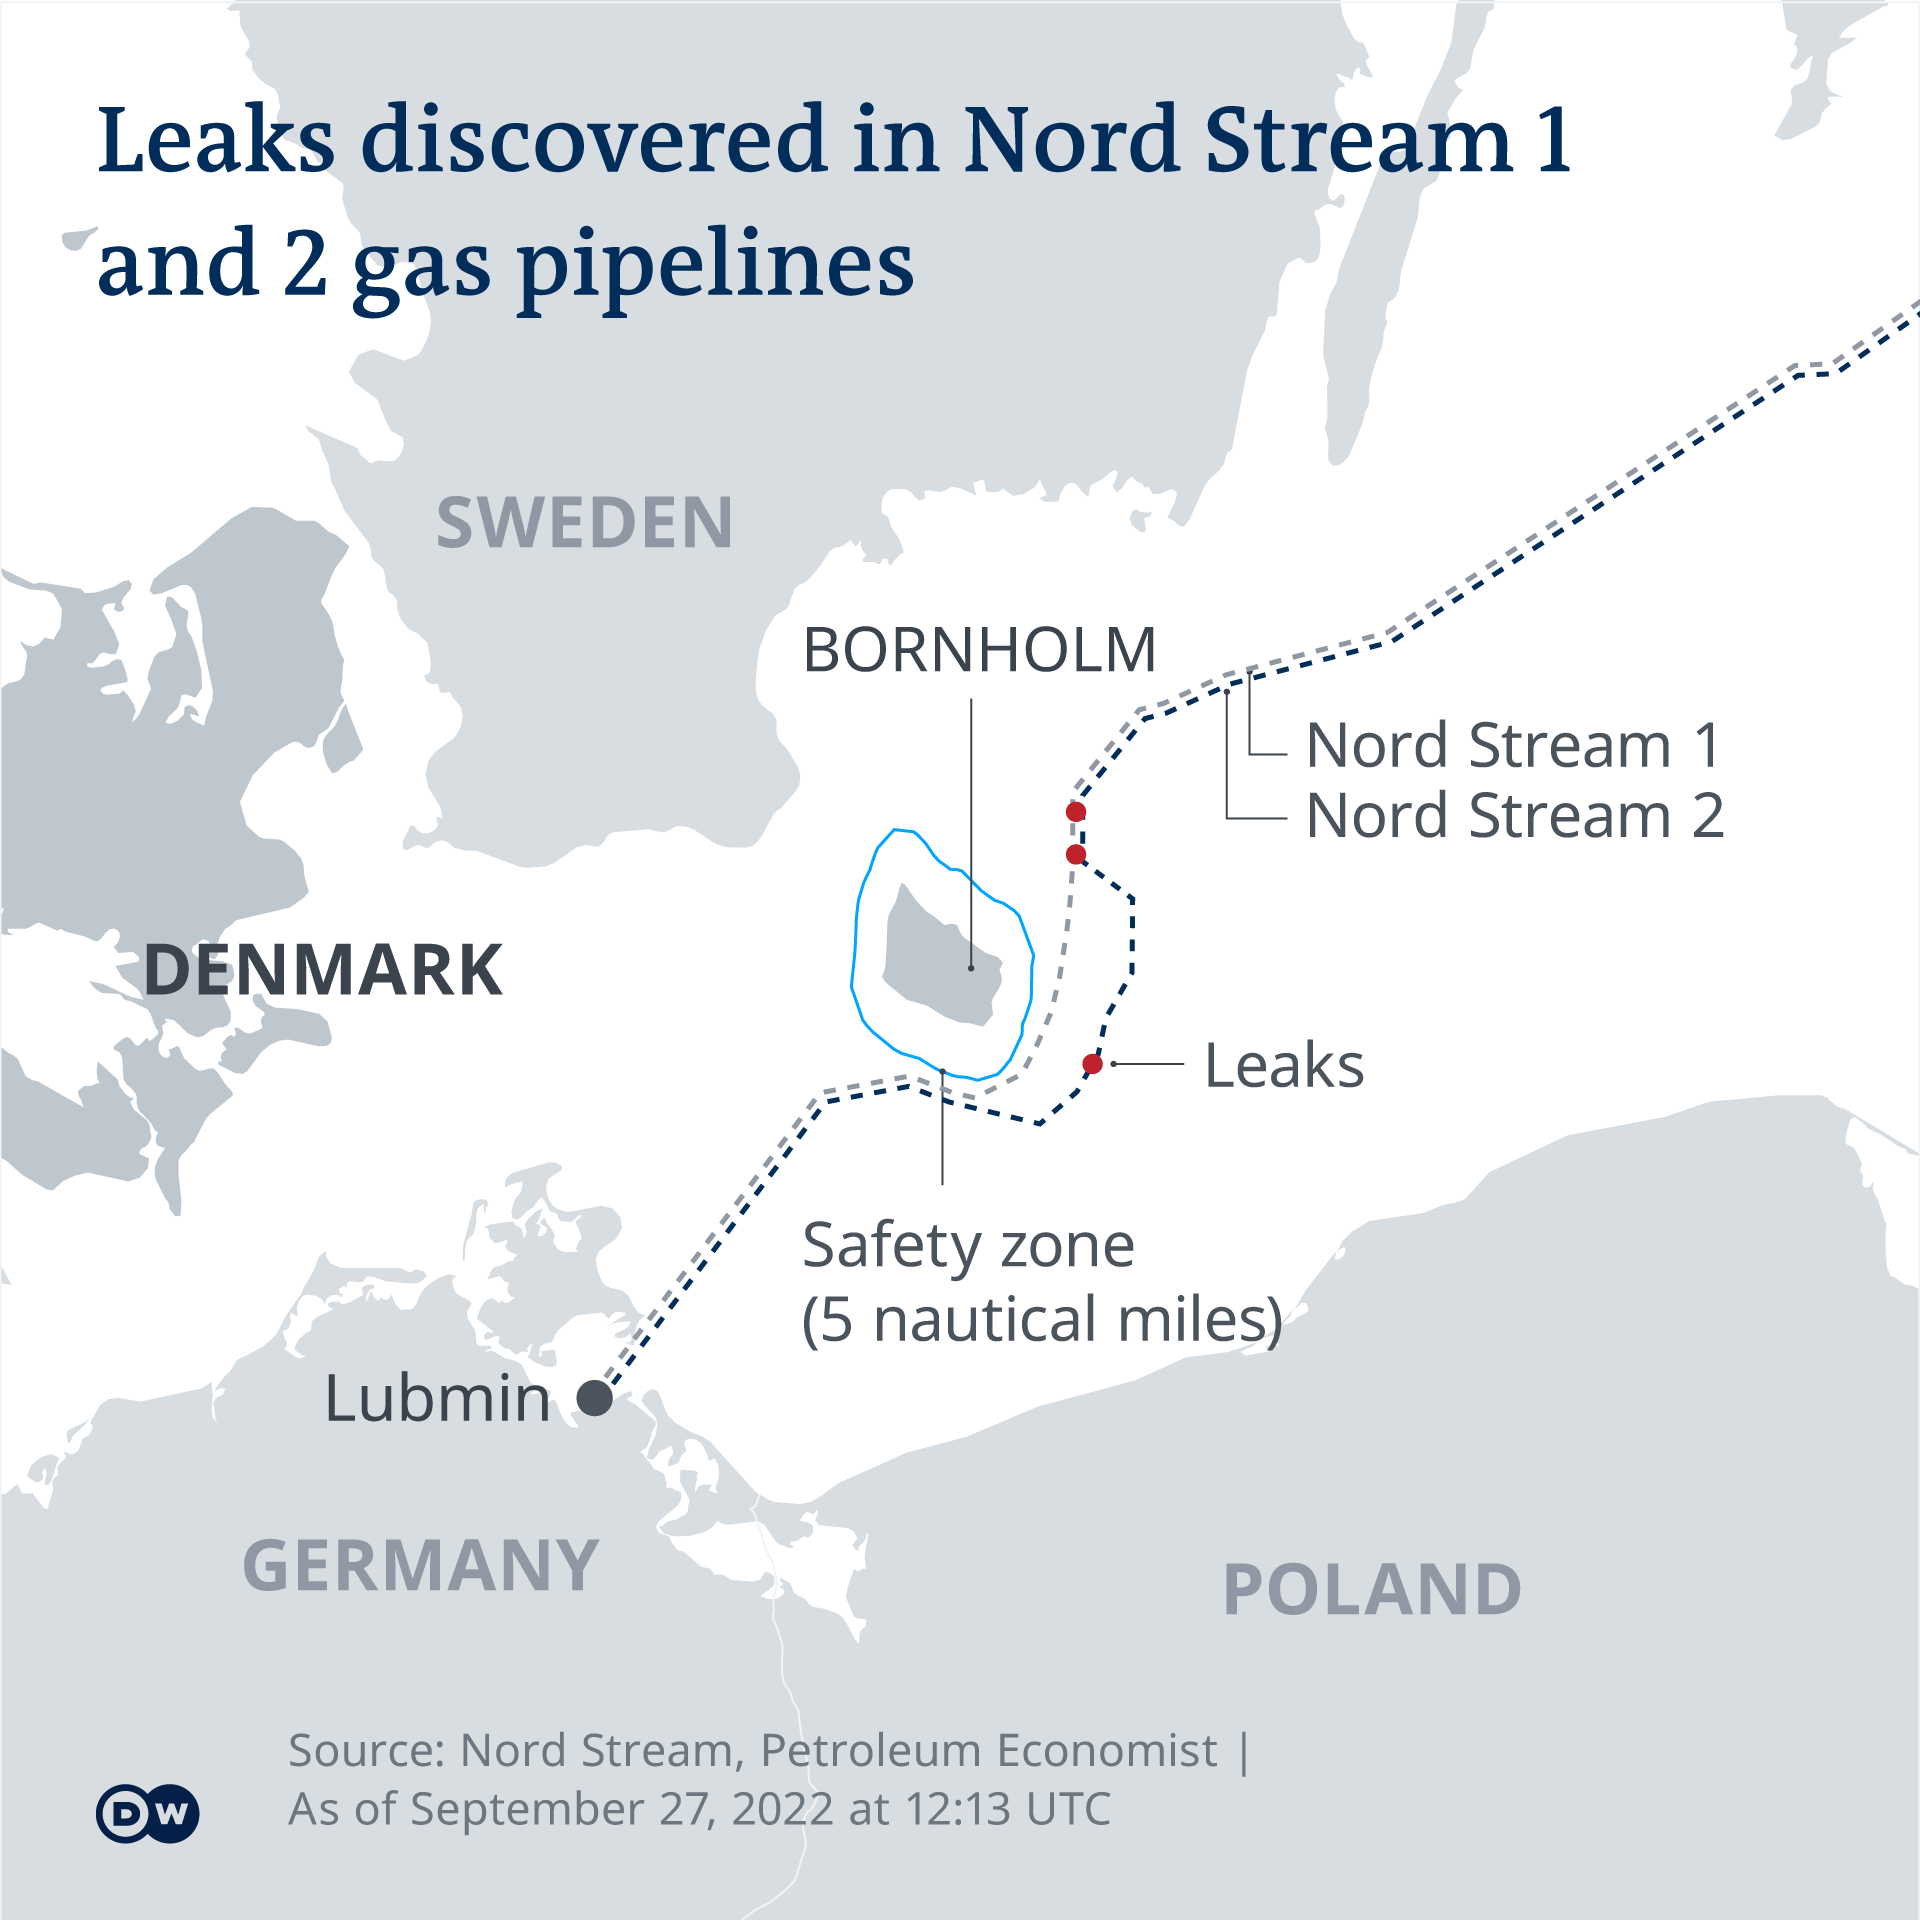 Map showing the areas where the nordstream 1 and 2 pipelines have leaked